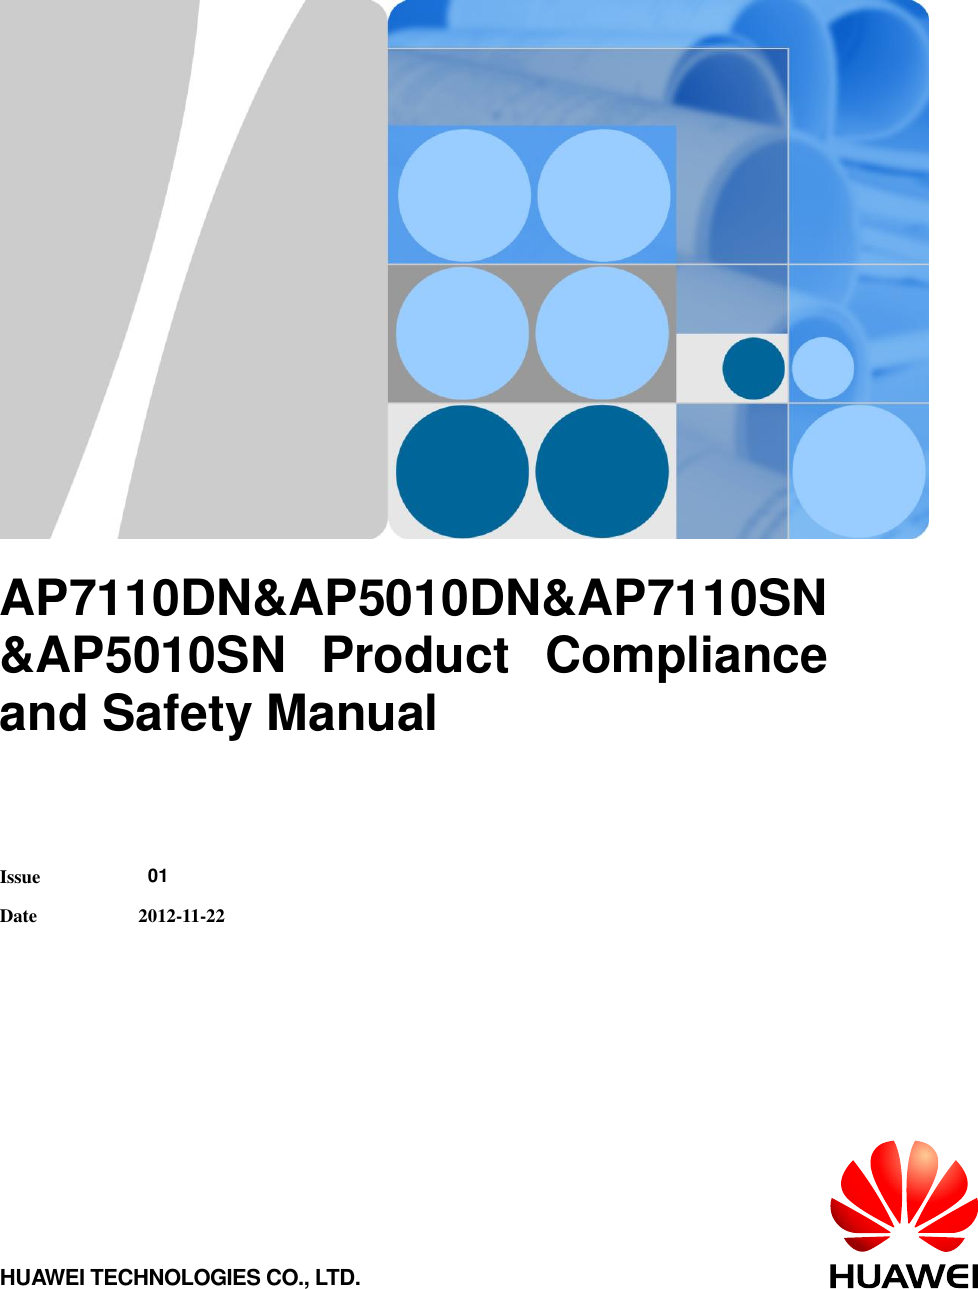         AP7110DN&amp;AP5010DN&amp;AP7110SN &amp;AP5010SN  Product  Compliance and Safety Manual   Issue  01 Date 2012-11-22 HUAWEI TECHNOLOGIES CO., LTD. 